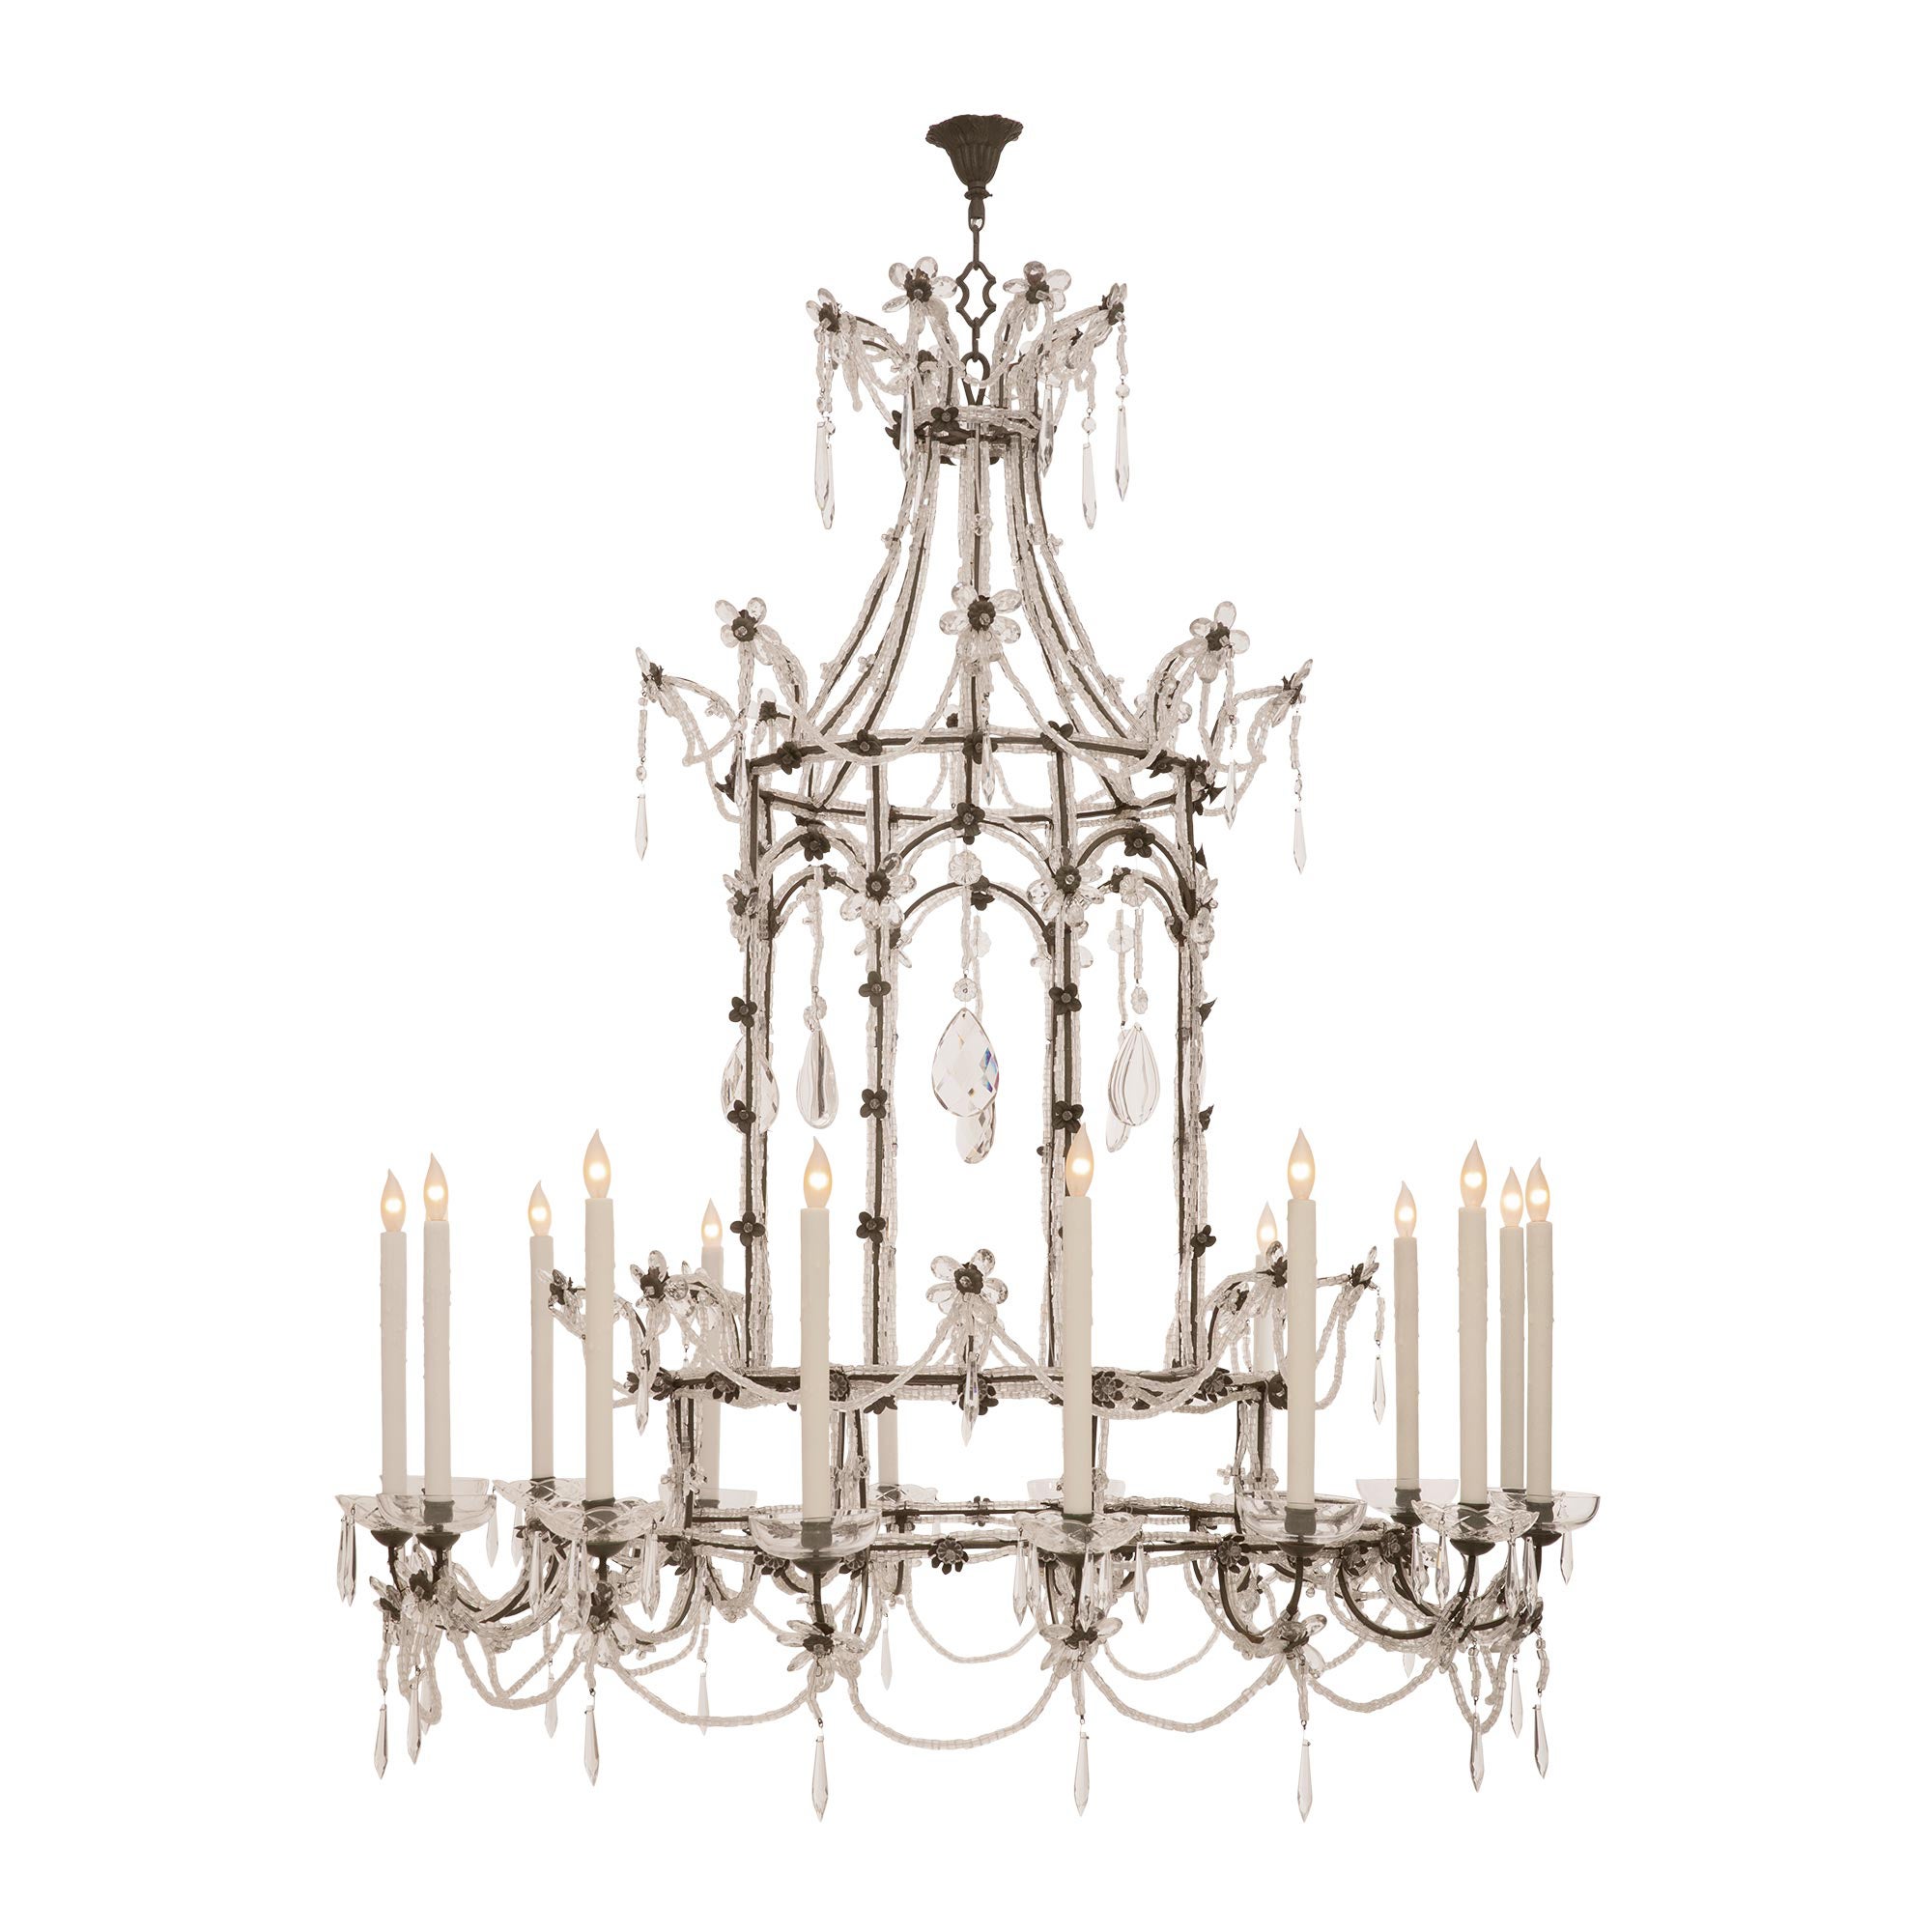 Italian Turn Of The Century Iron, Crystal And Cut Glass Chandelier For Sale